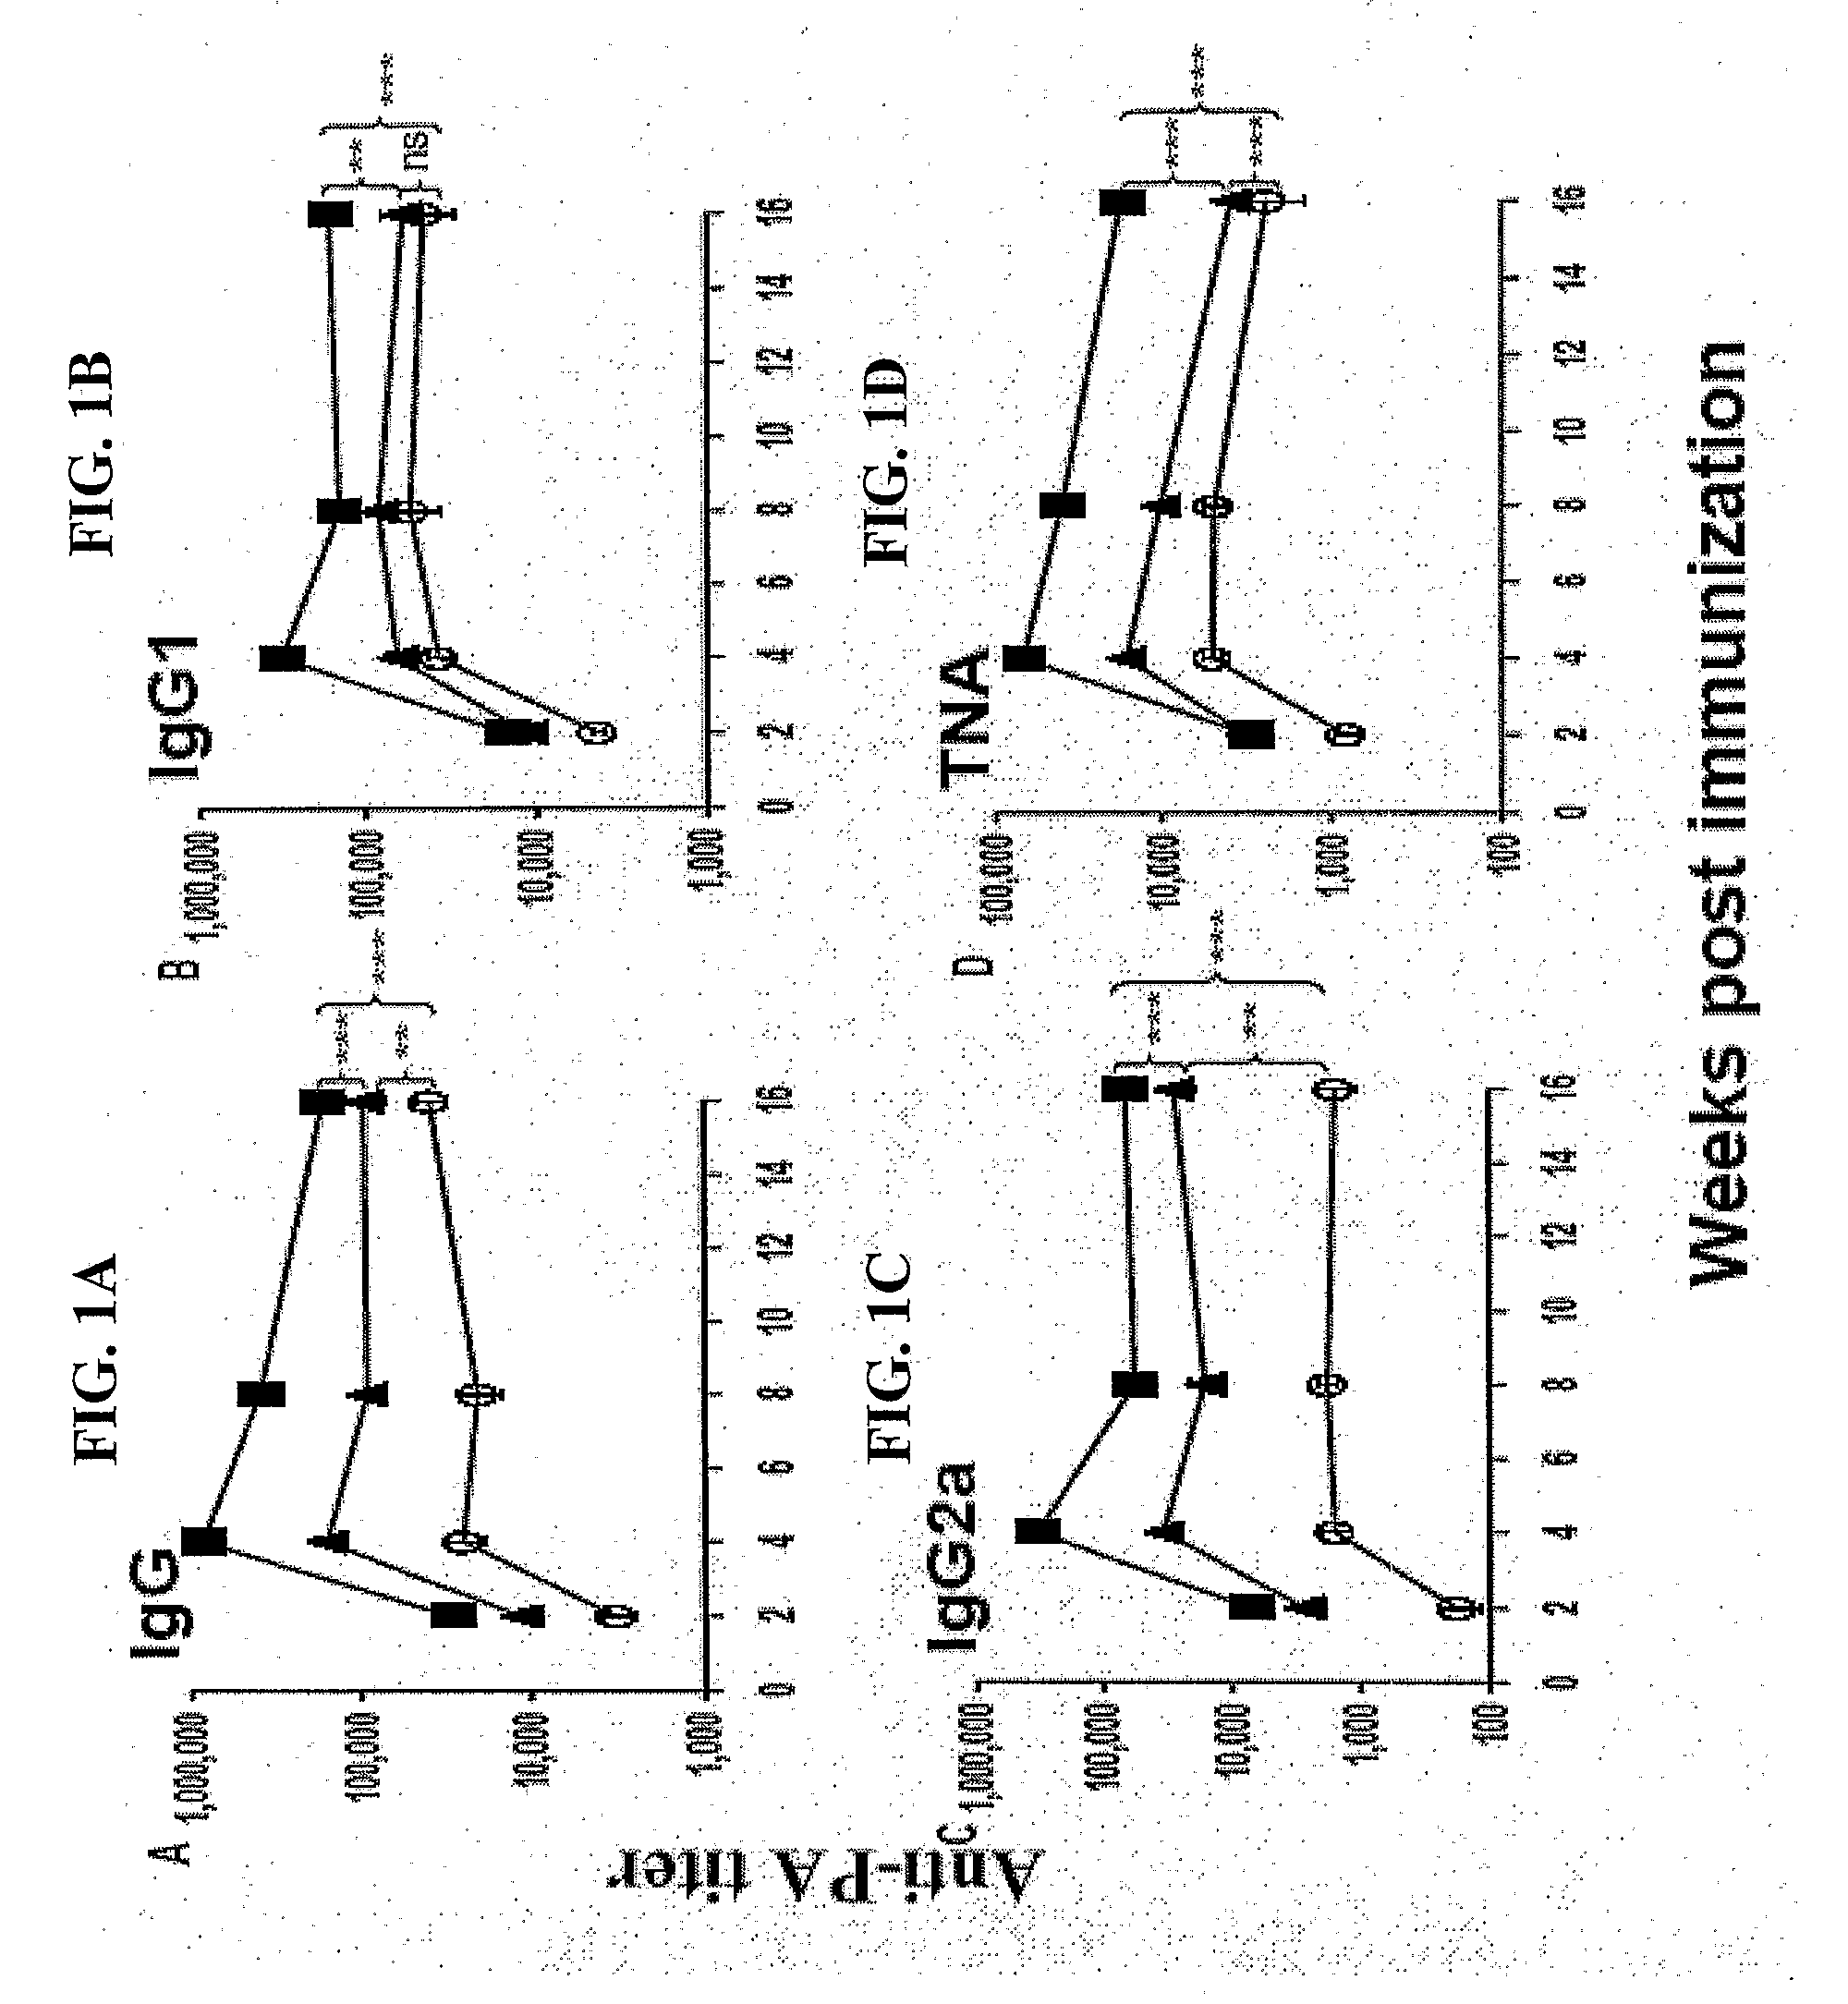 Immunogenic Compositions Containing Anthrax Antigen, Biodegradable Polymer Microparticles, And Polynucleotide-Containing Immunological Adjuvant